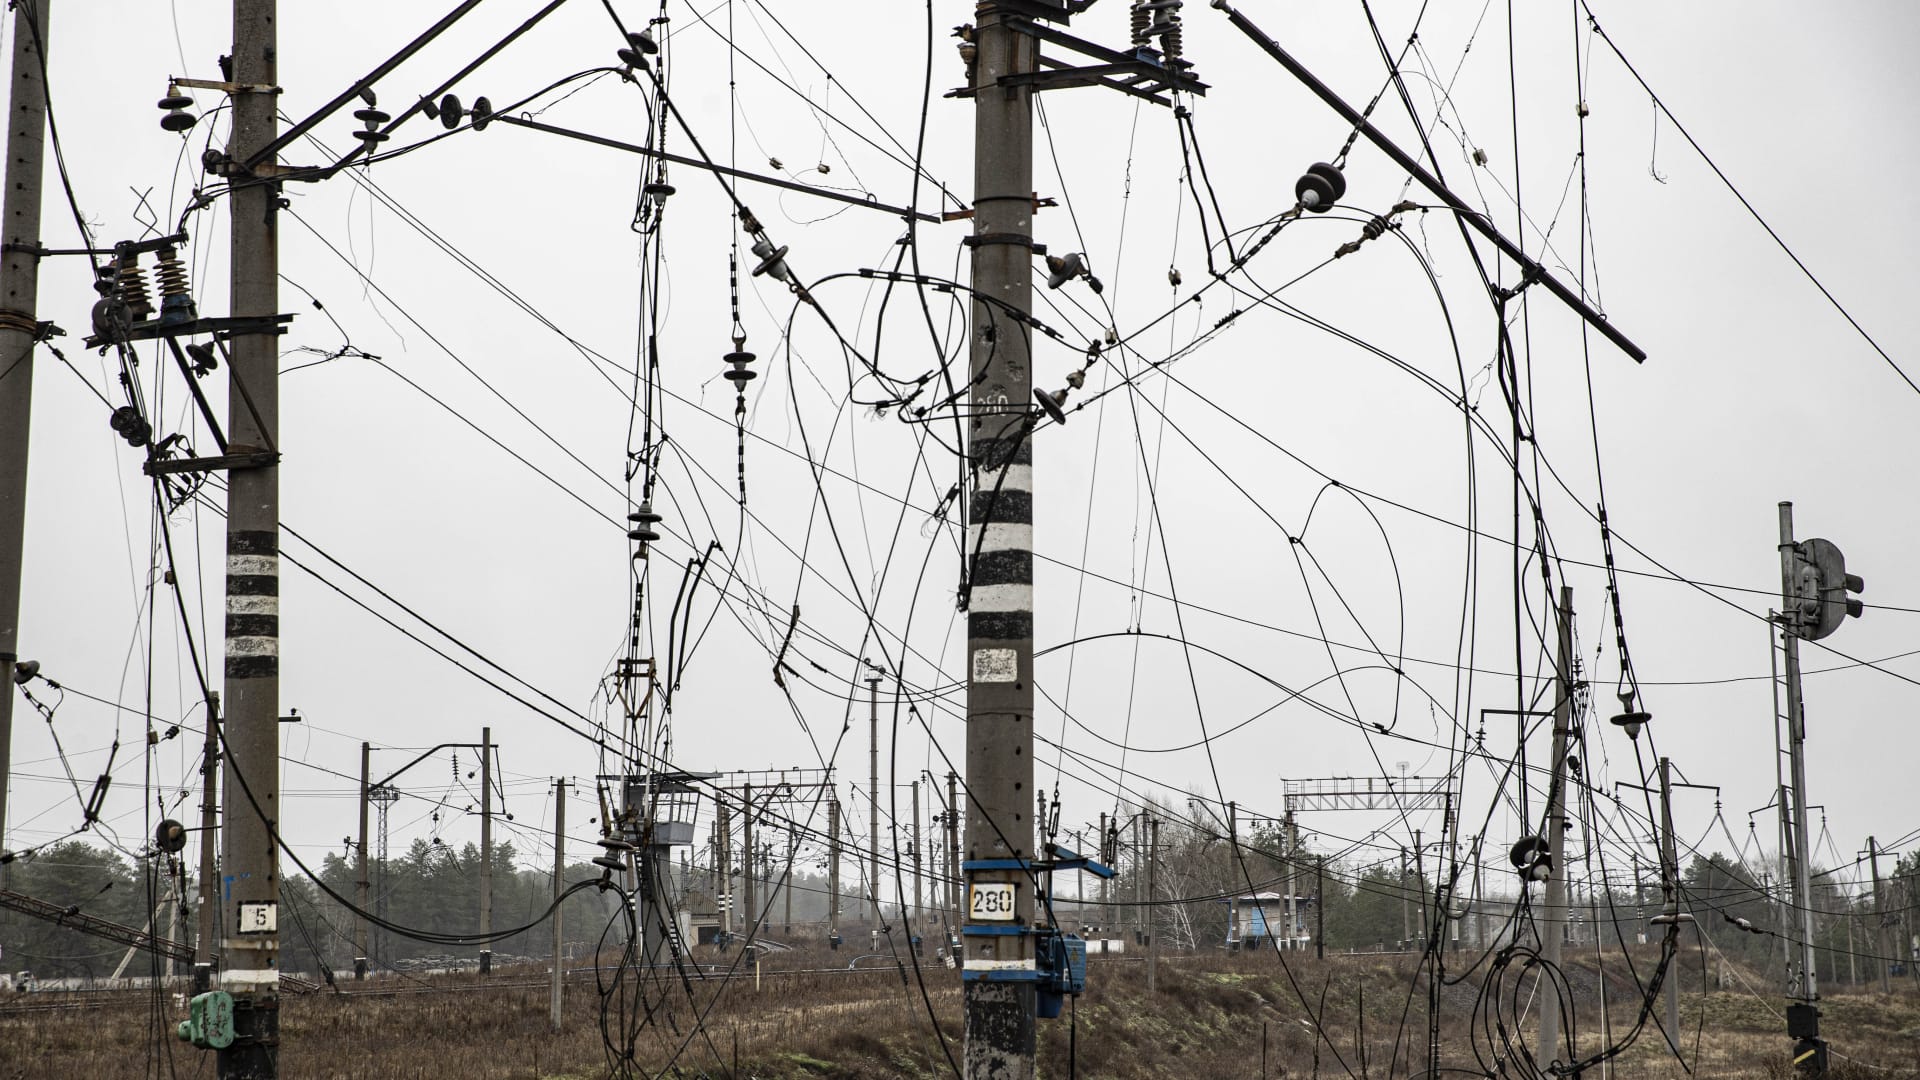 Electrical wires damaged after the Ukrainian army regained control from Russian forces in Lyman, Donetsk Oblast, Ukraine, on Nov. 27, 2022.